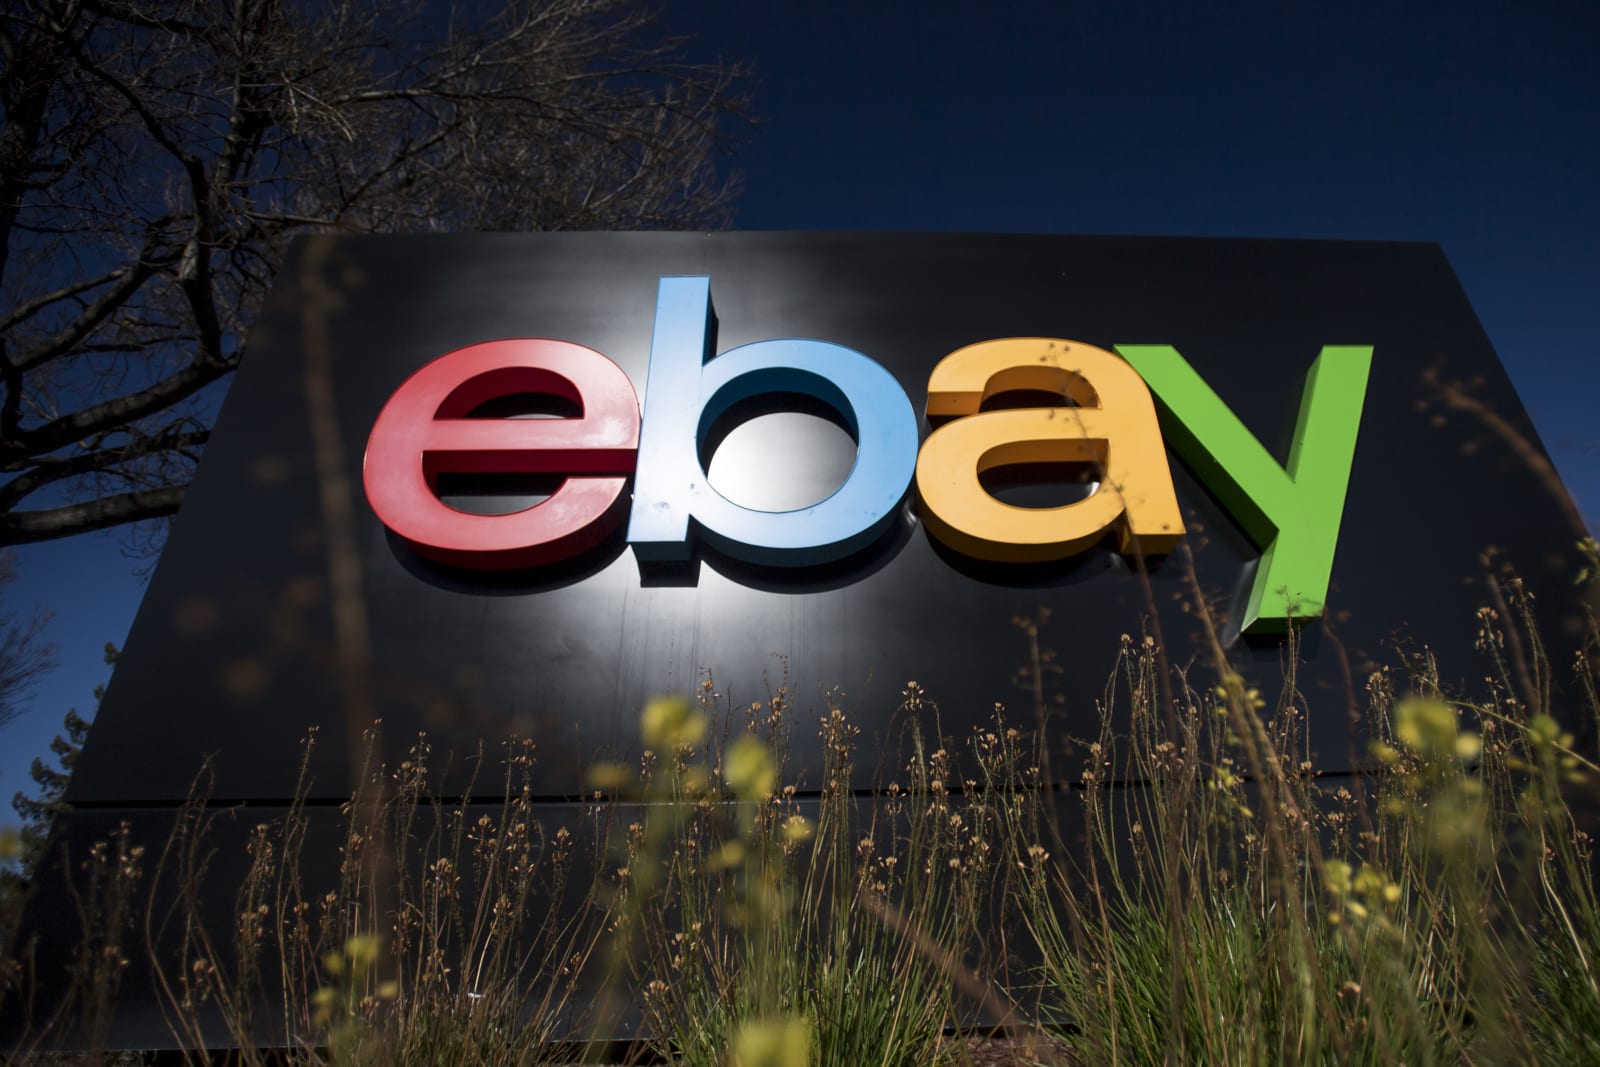 eBay will match prices from Amazon and Walmart on certain items